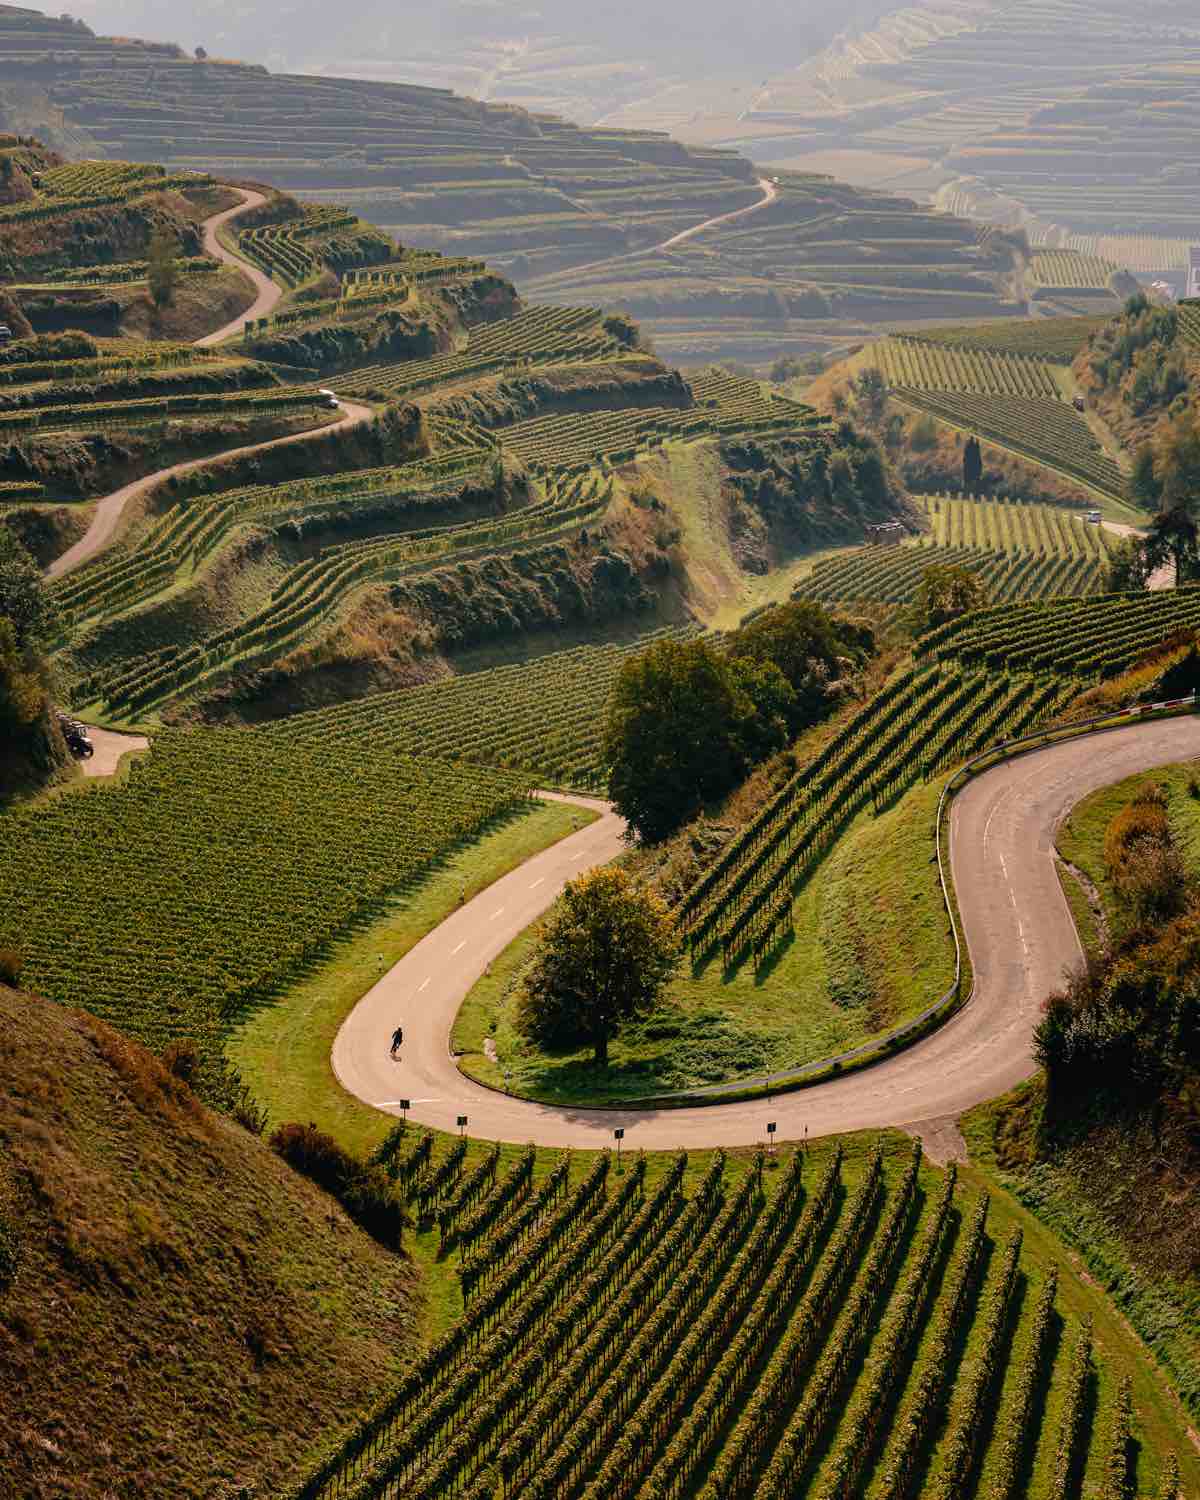 bikerumor pic of the day photo of a cyclist from far away in the middle of a curvy road surrounded by vineyards that grow up the sides of the mountain. The sky is hazy and the sun is bright.